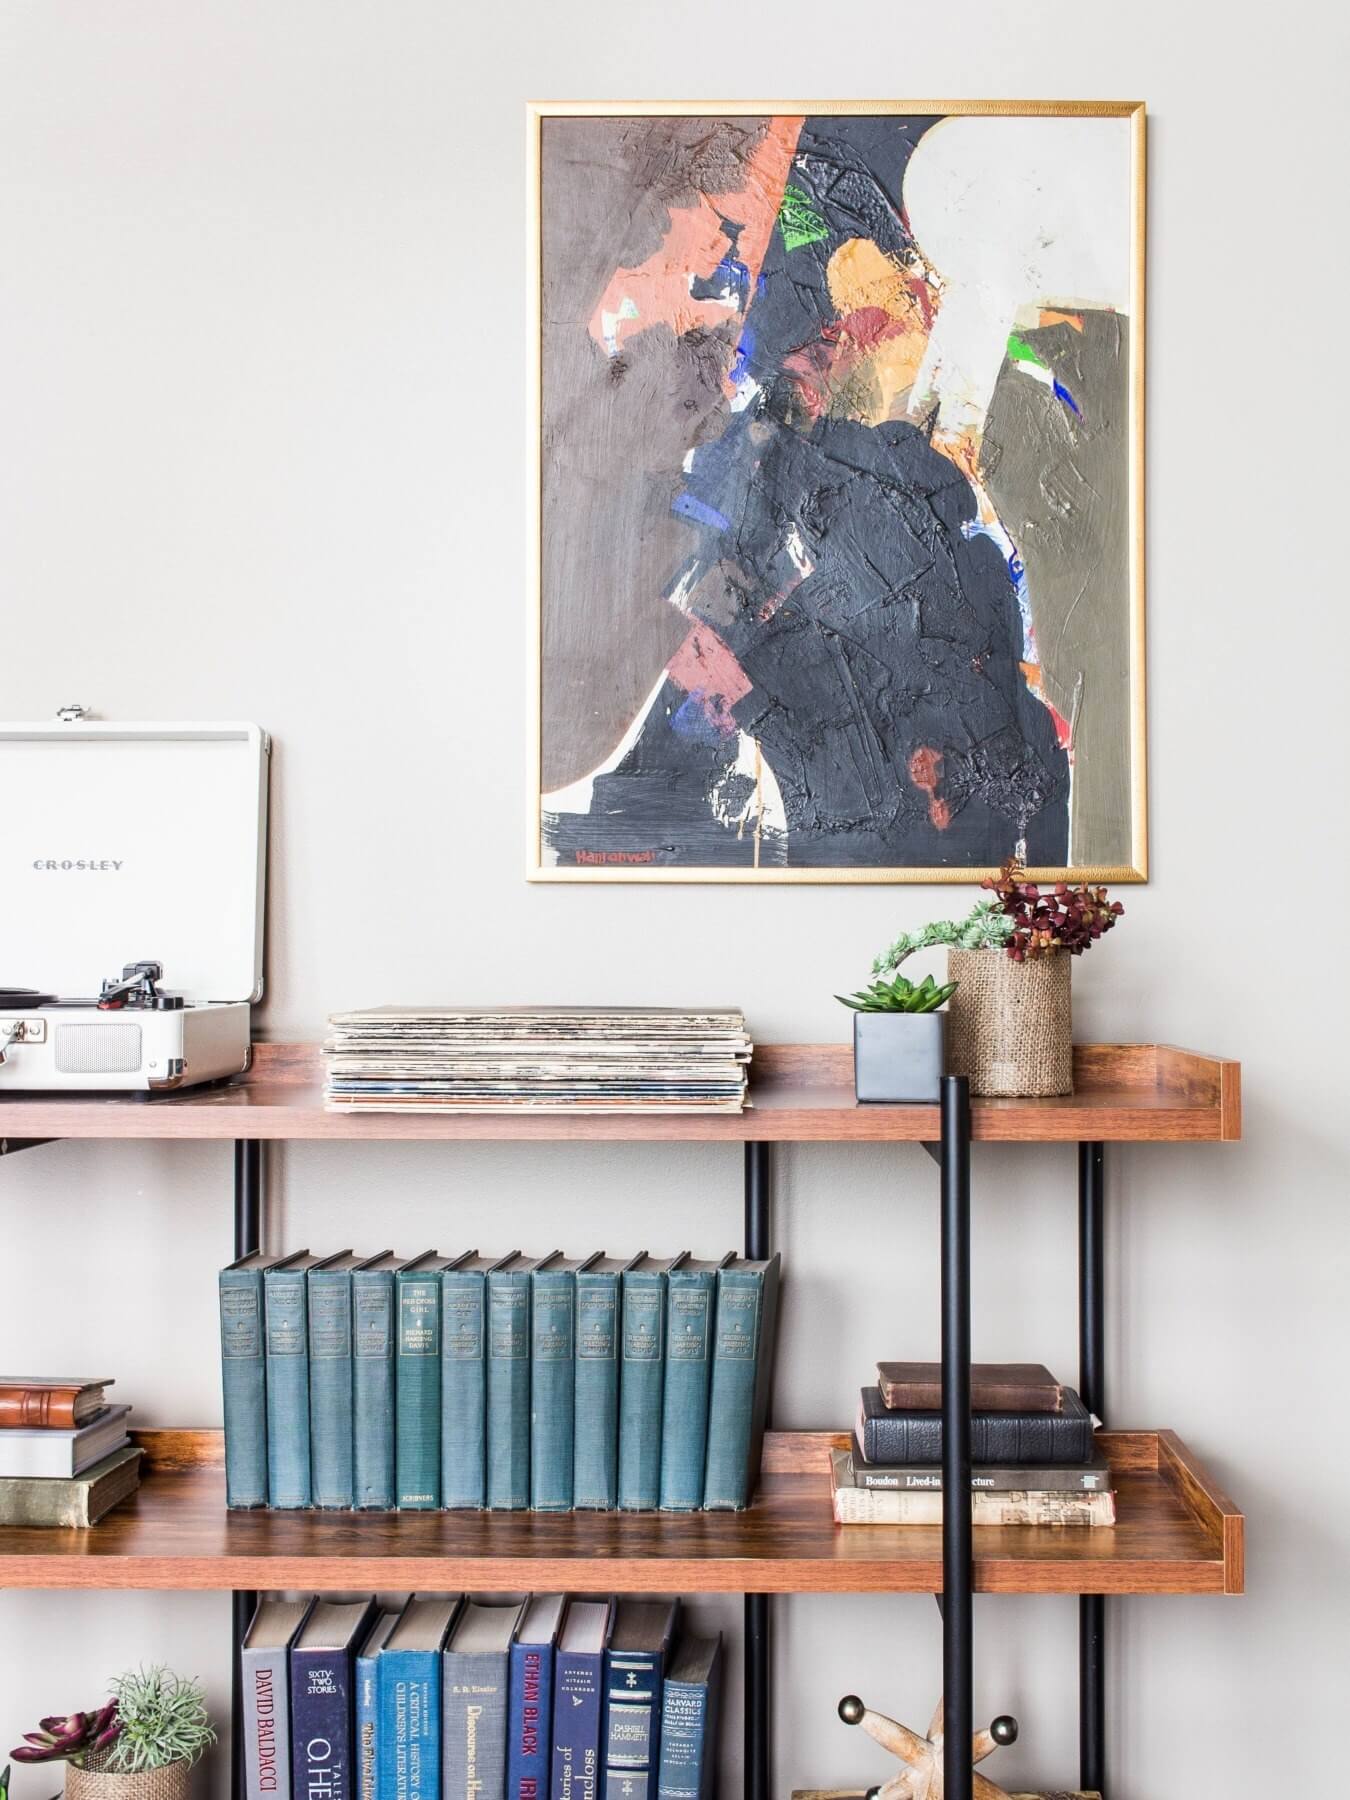 Design vignette from Marcelle Guilbeau, featuring records, books, succulents and colorful art